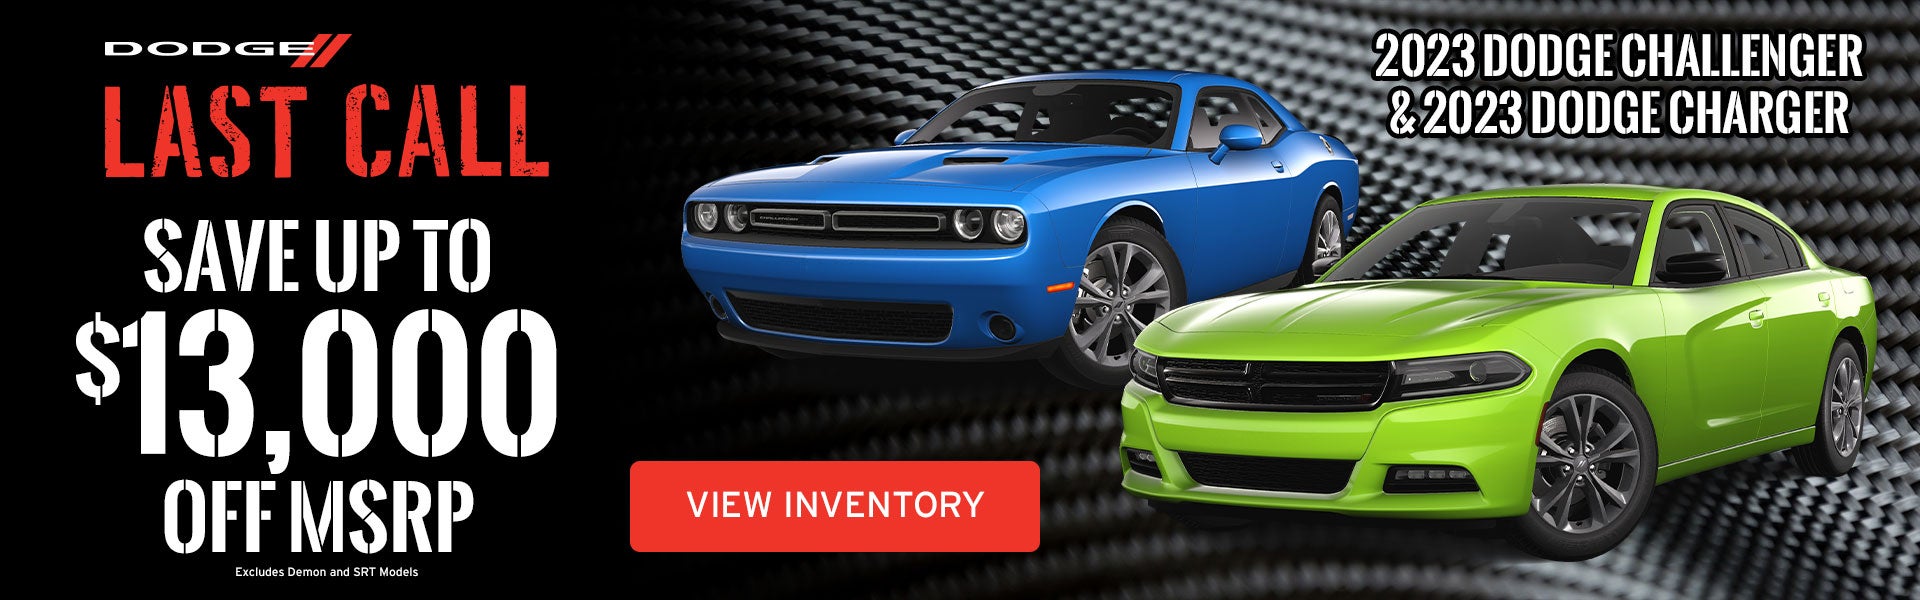 Last Call! Save up to $13k on a New Challenger or Charger